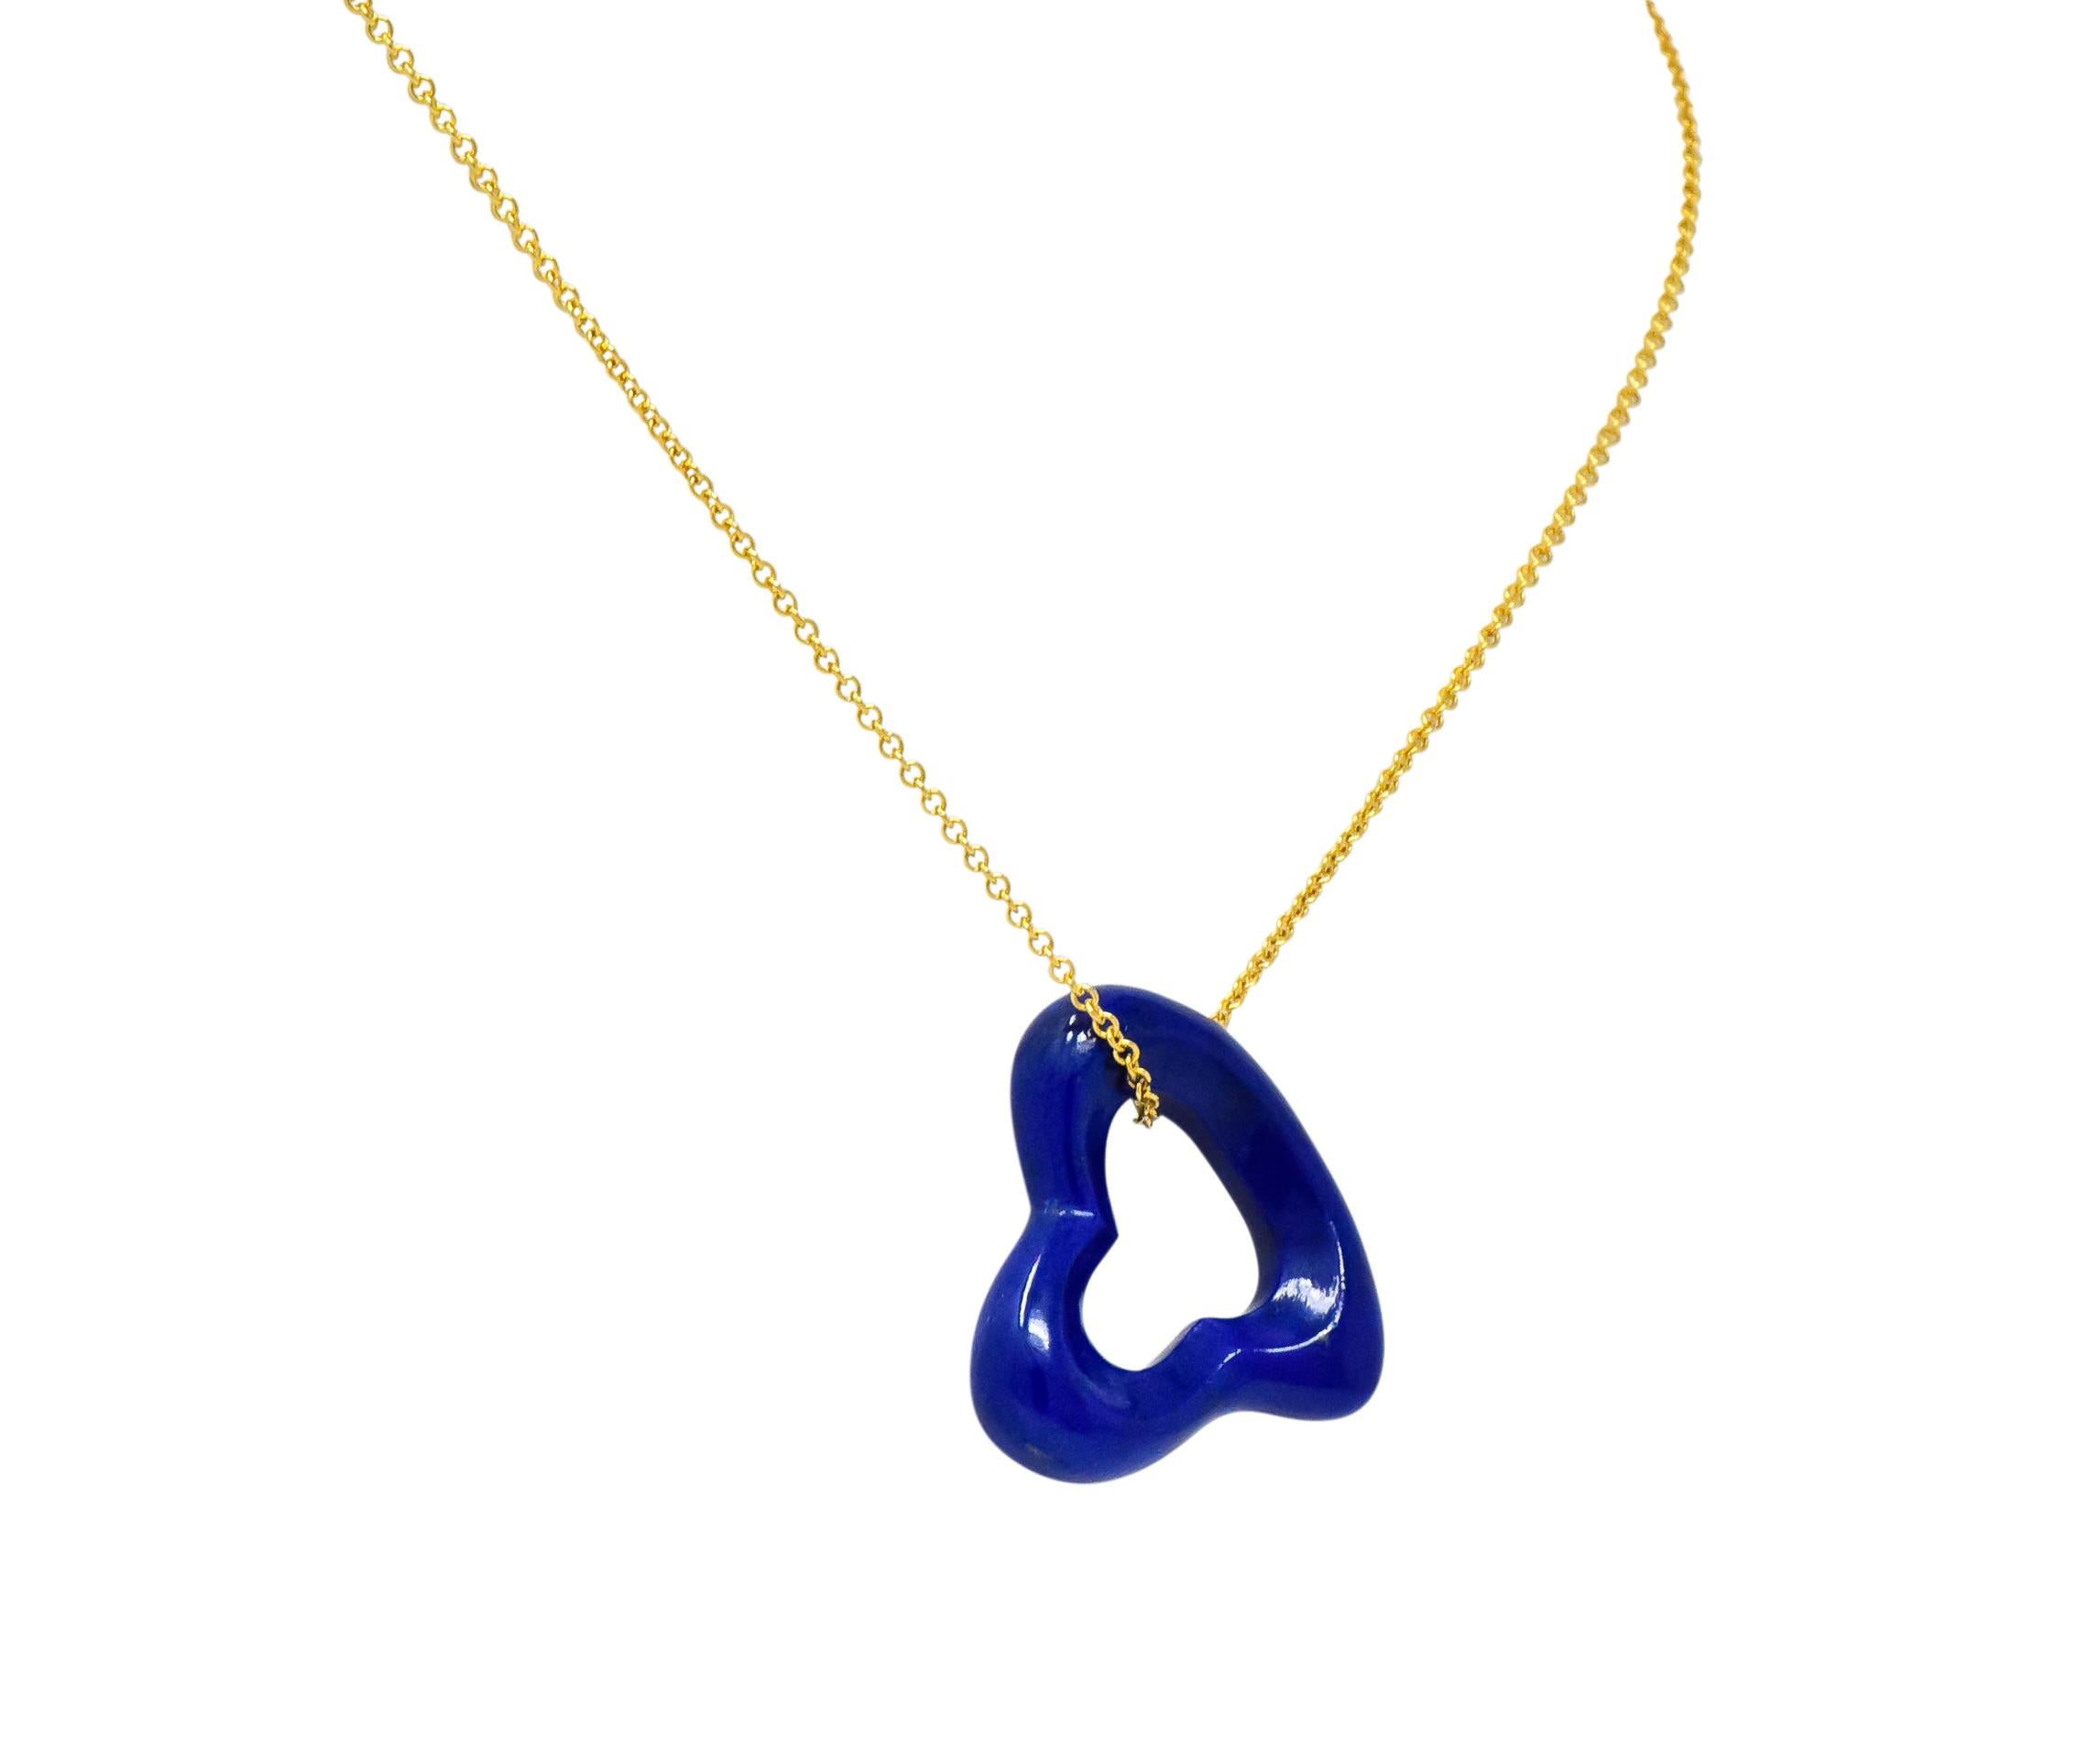 Featuring a carved and polished lapis lazuli, bright royal blue with tiny flecks of pyrite

On a cable style chain with spring ring clasp

From her popular Open Heart collection

Chain fully signed Tiffany & Co., Peretti for Elsa Peretti and stamped